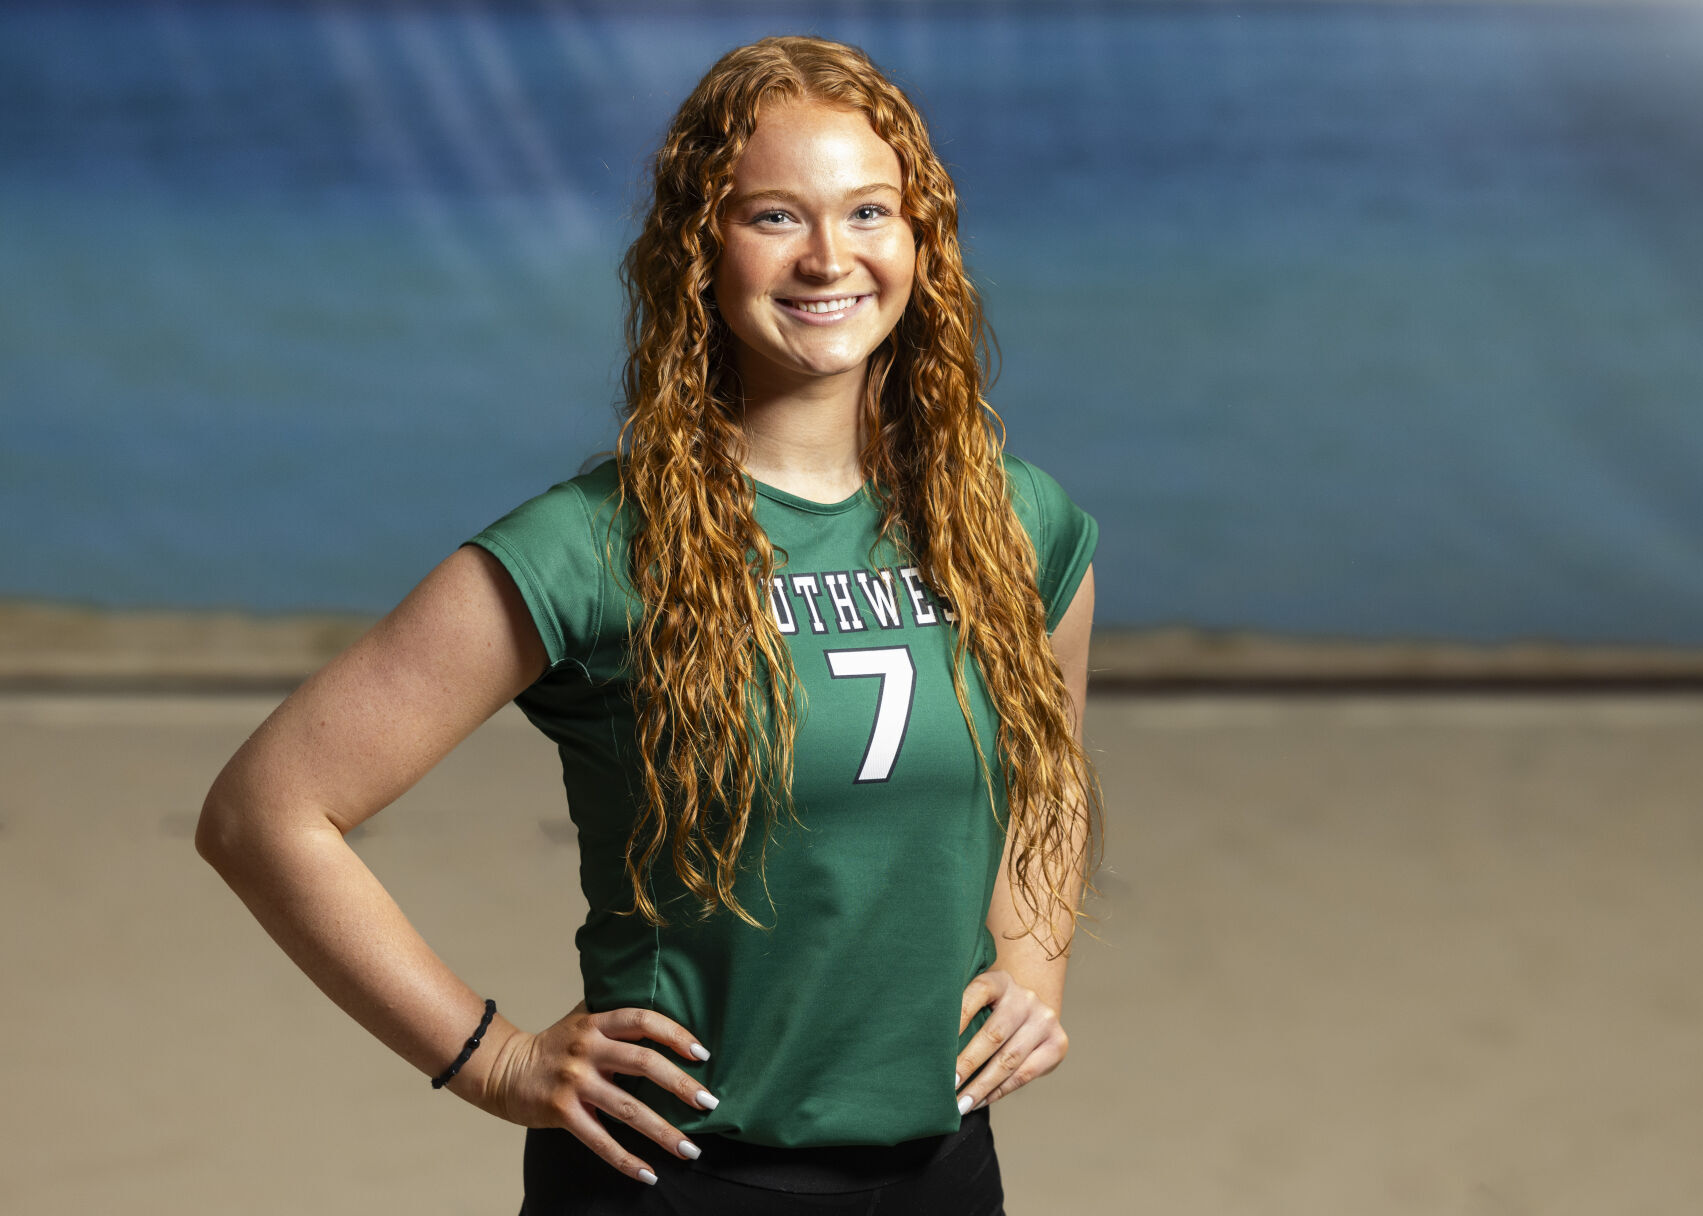 Malayah Long: Meet the Inspirational Setter from the Silver Hawks